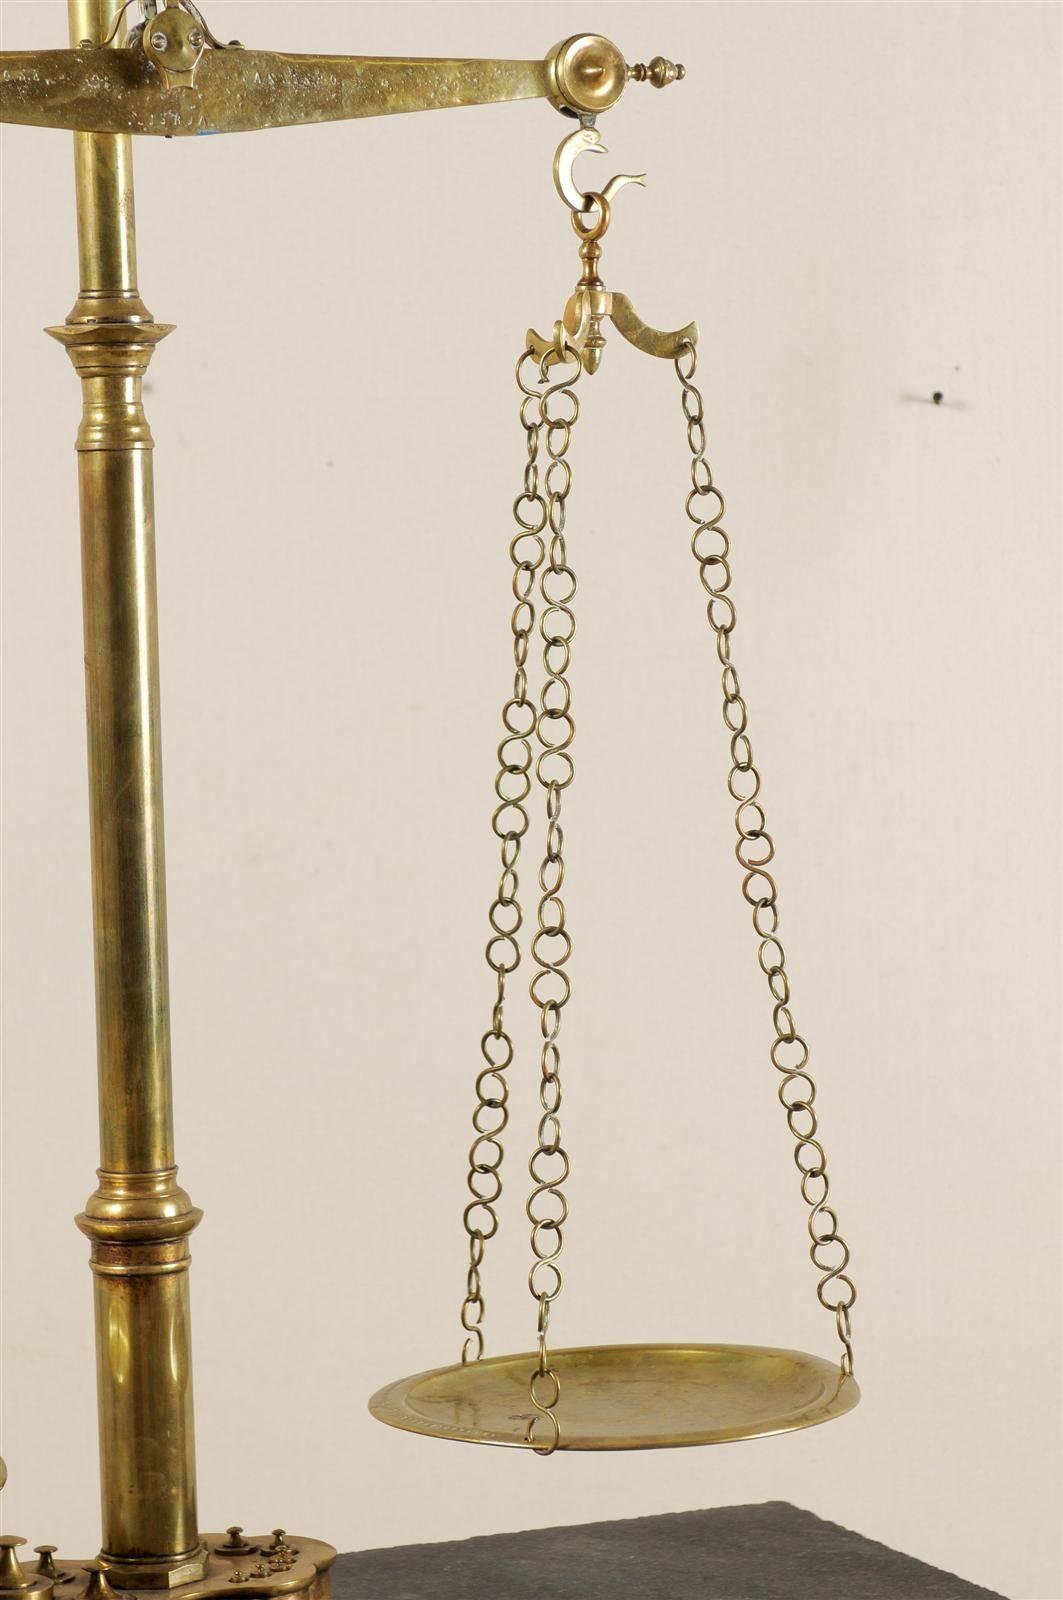 A Grand Sized 19th Century Dutch Brass Scale with Several Small Weights Included 1